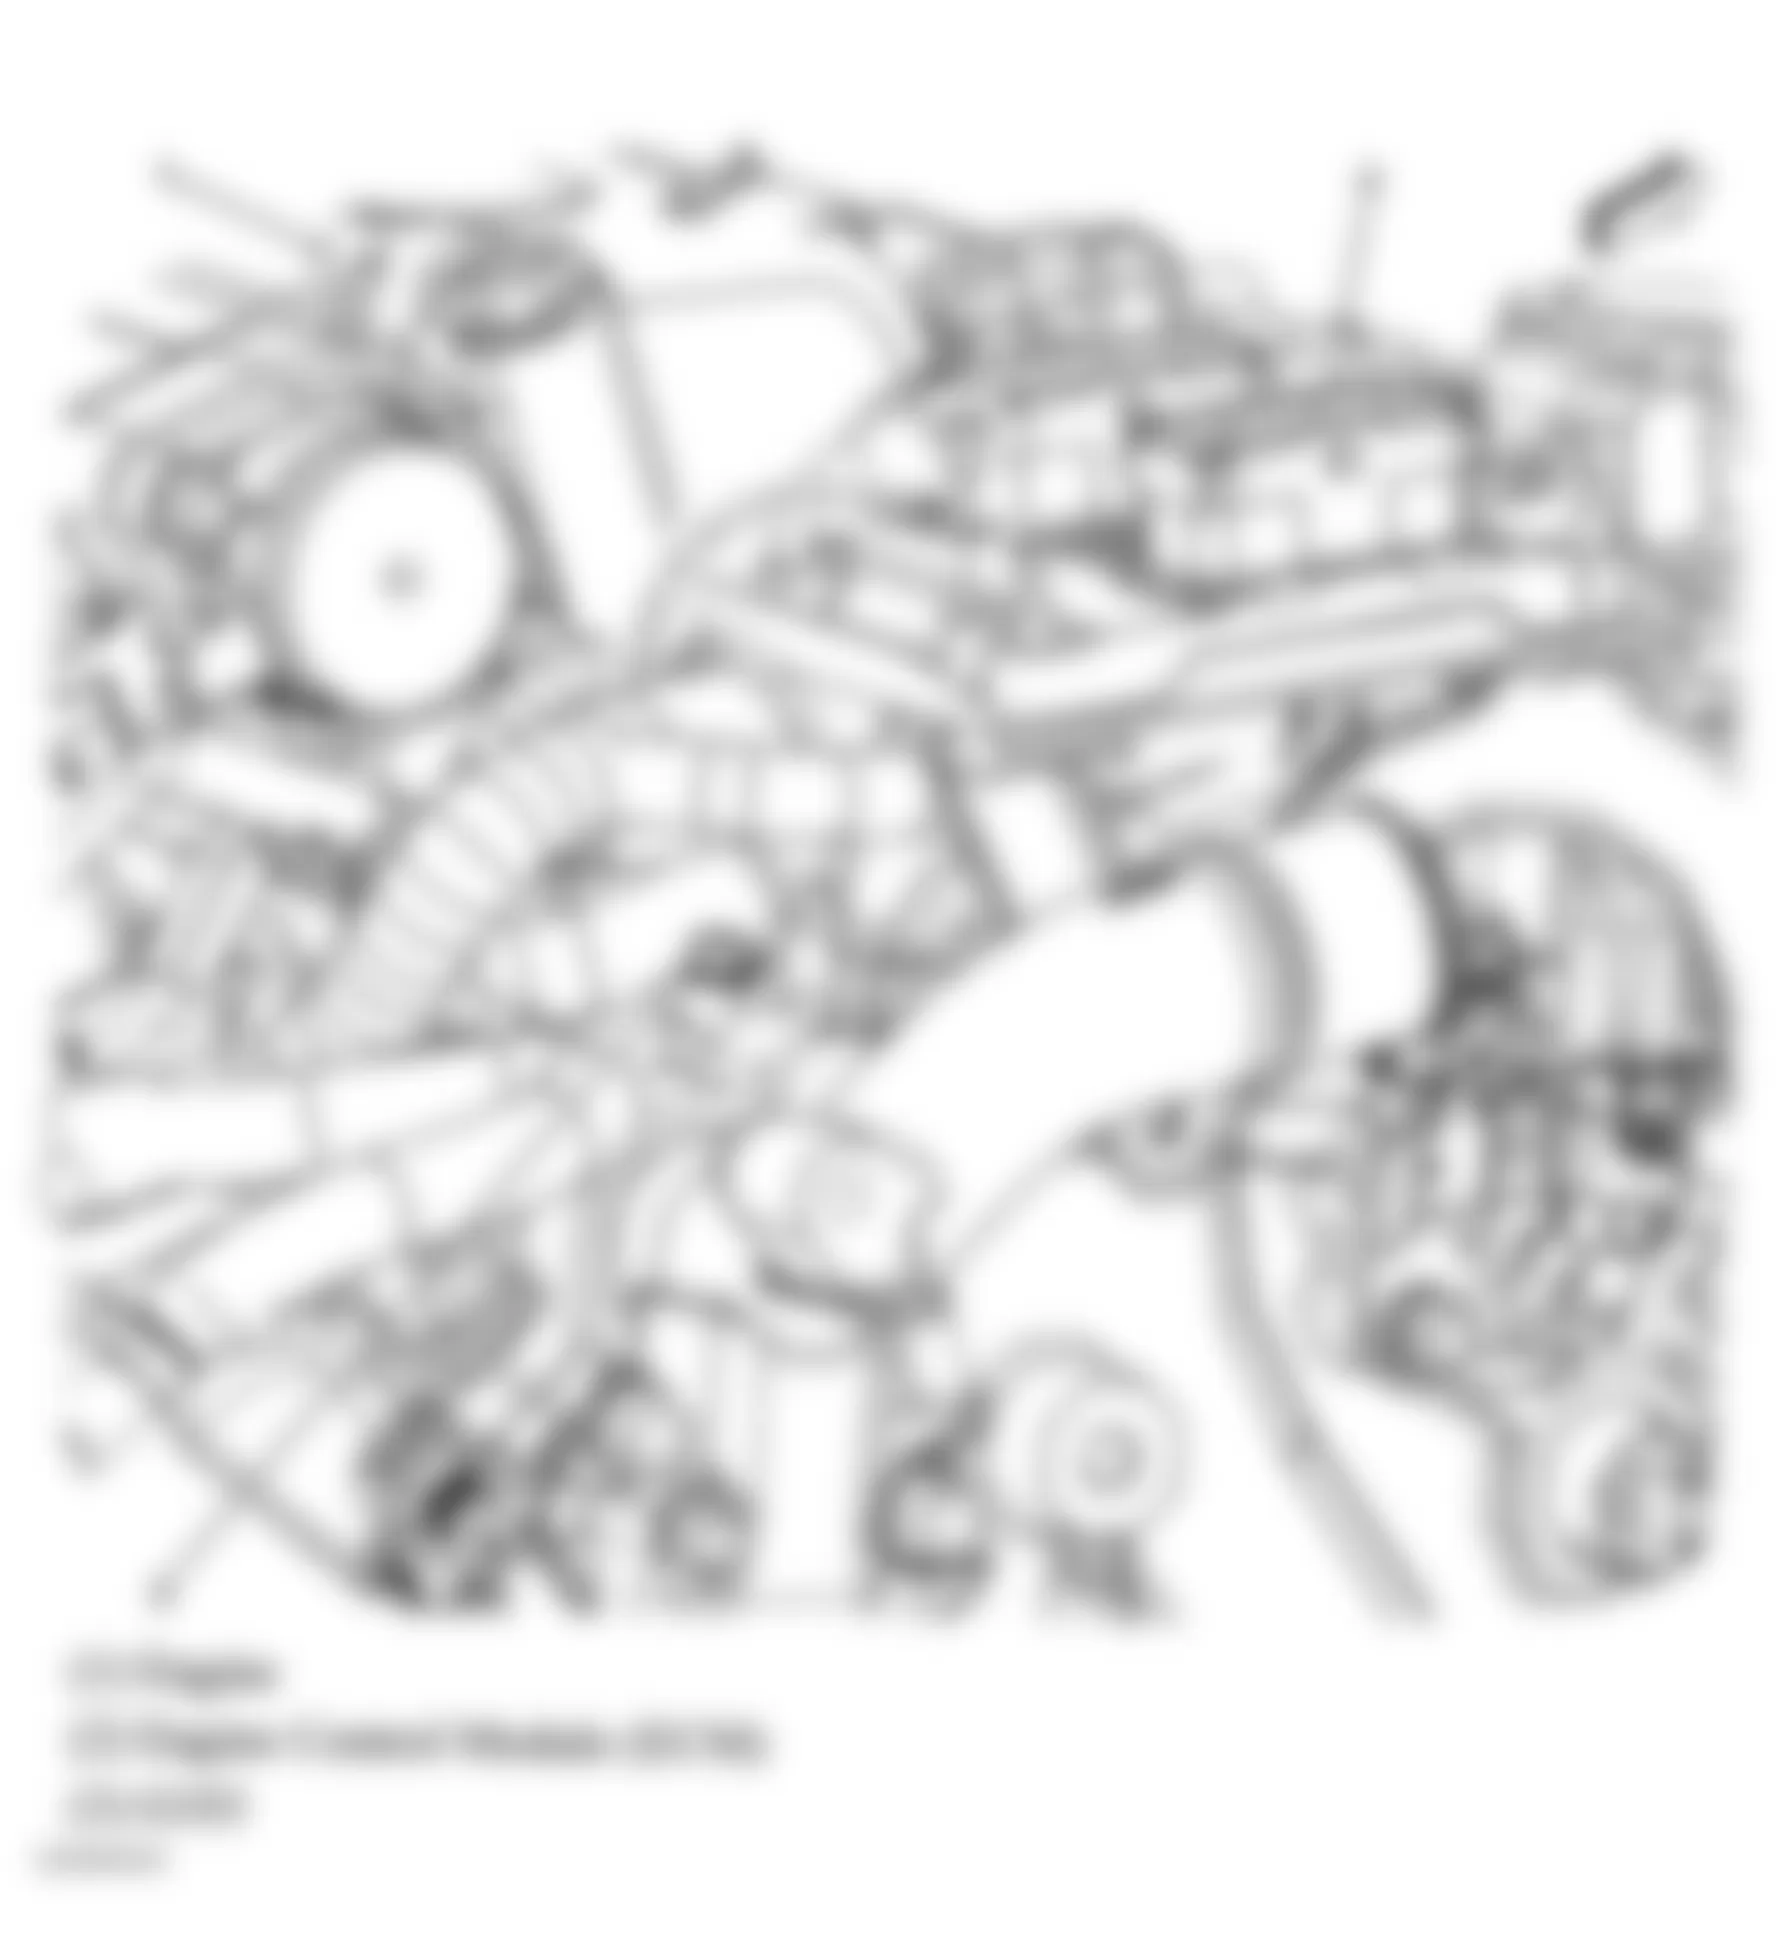 Buick LaCrosse CXL 2005 - Component Locations -  Engine Assembly (3.6L)